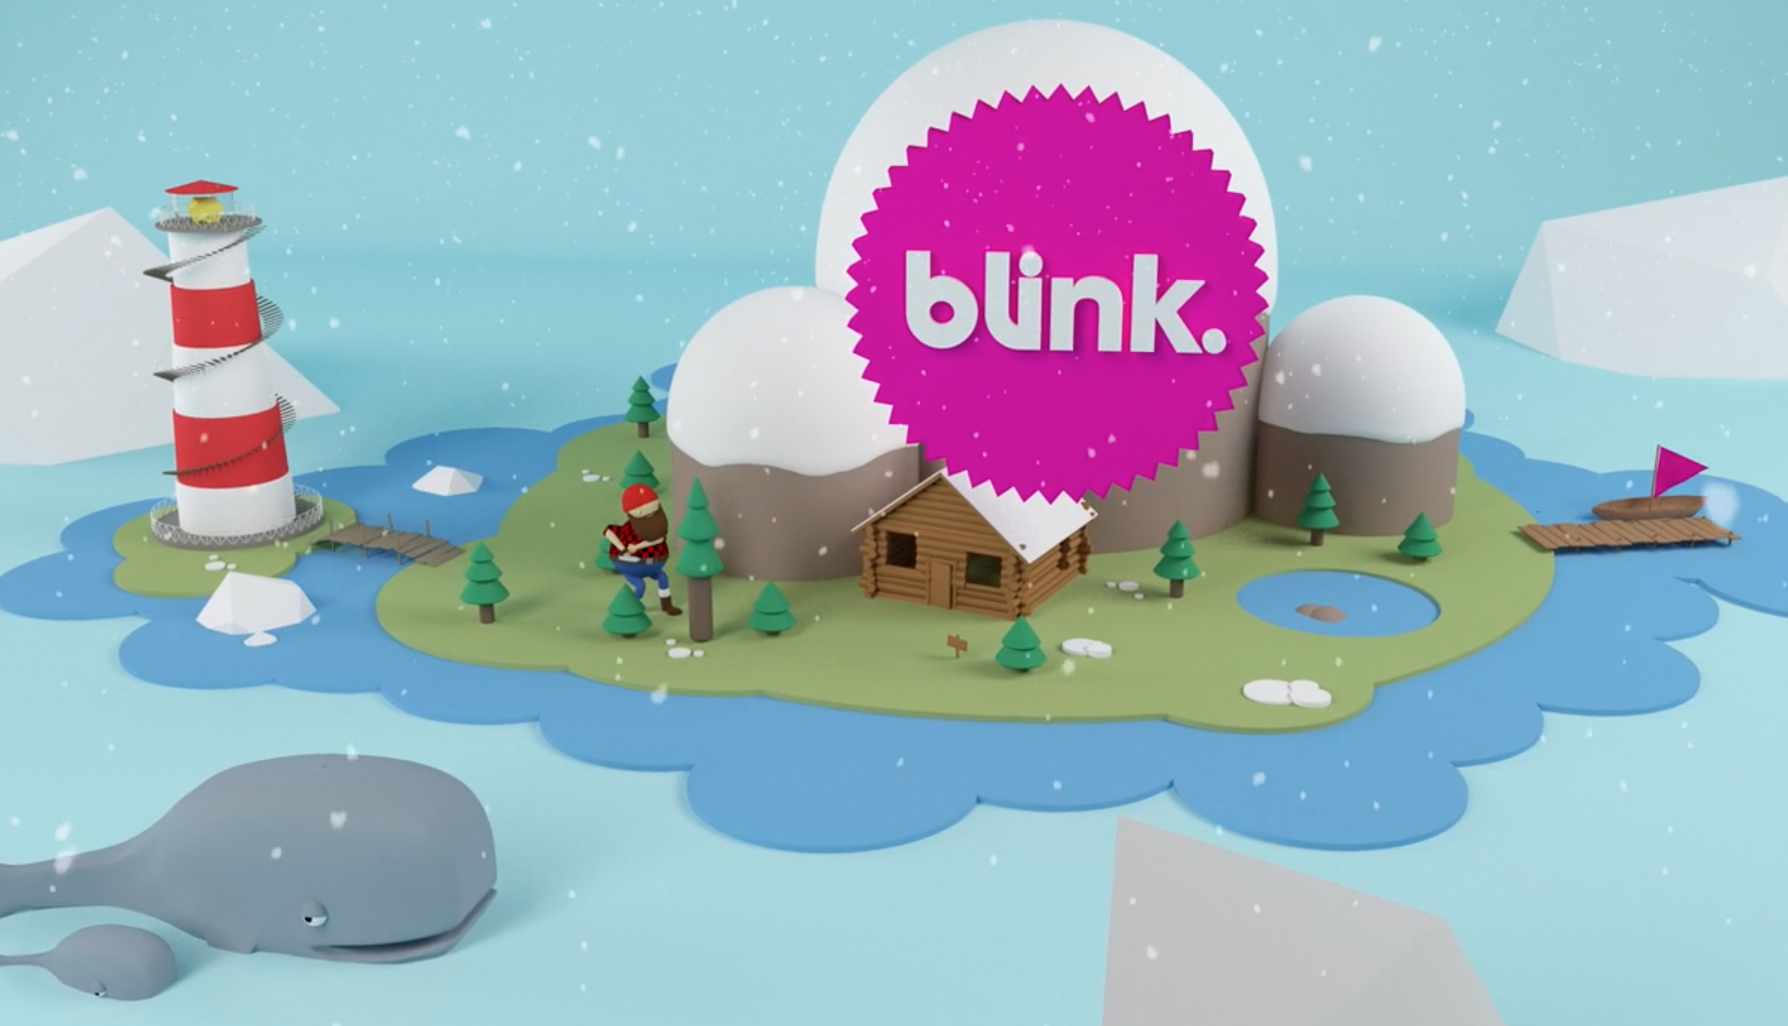 Happy holidays from Blink